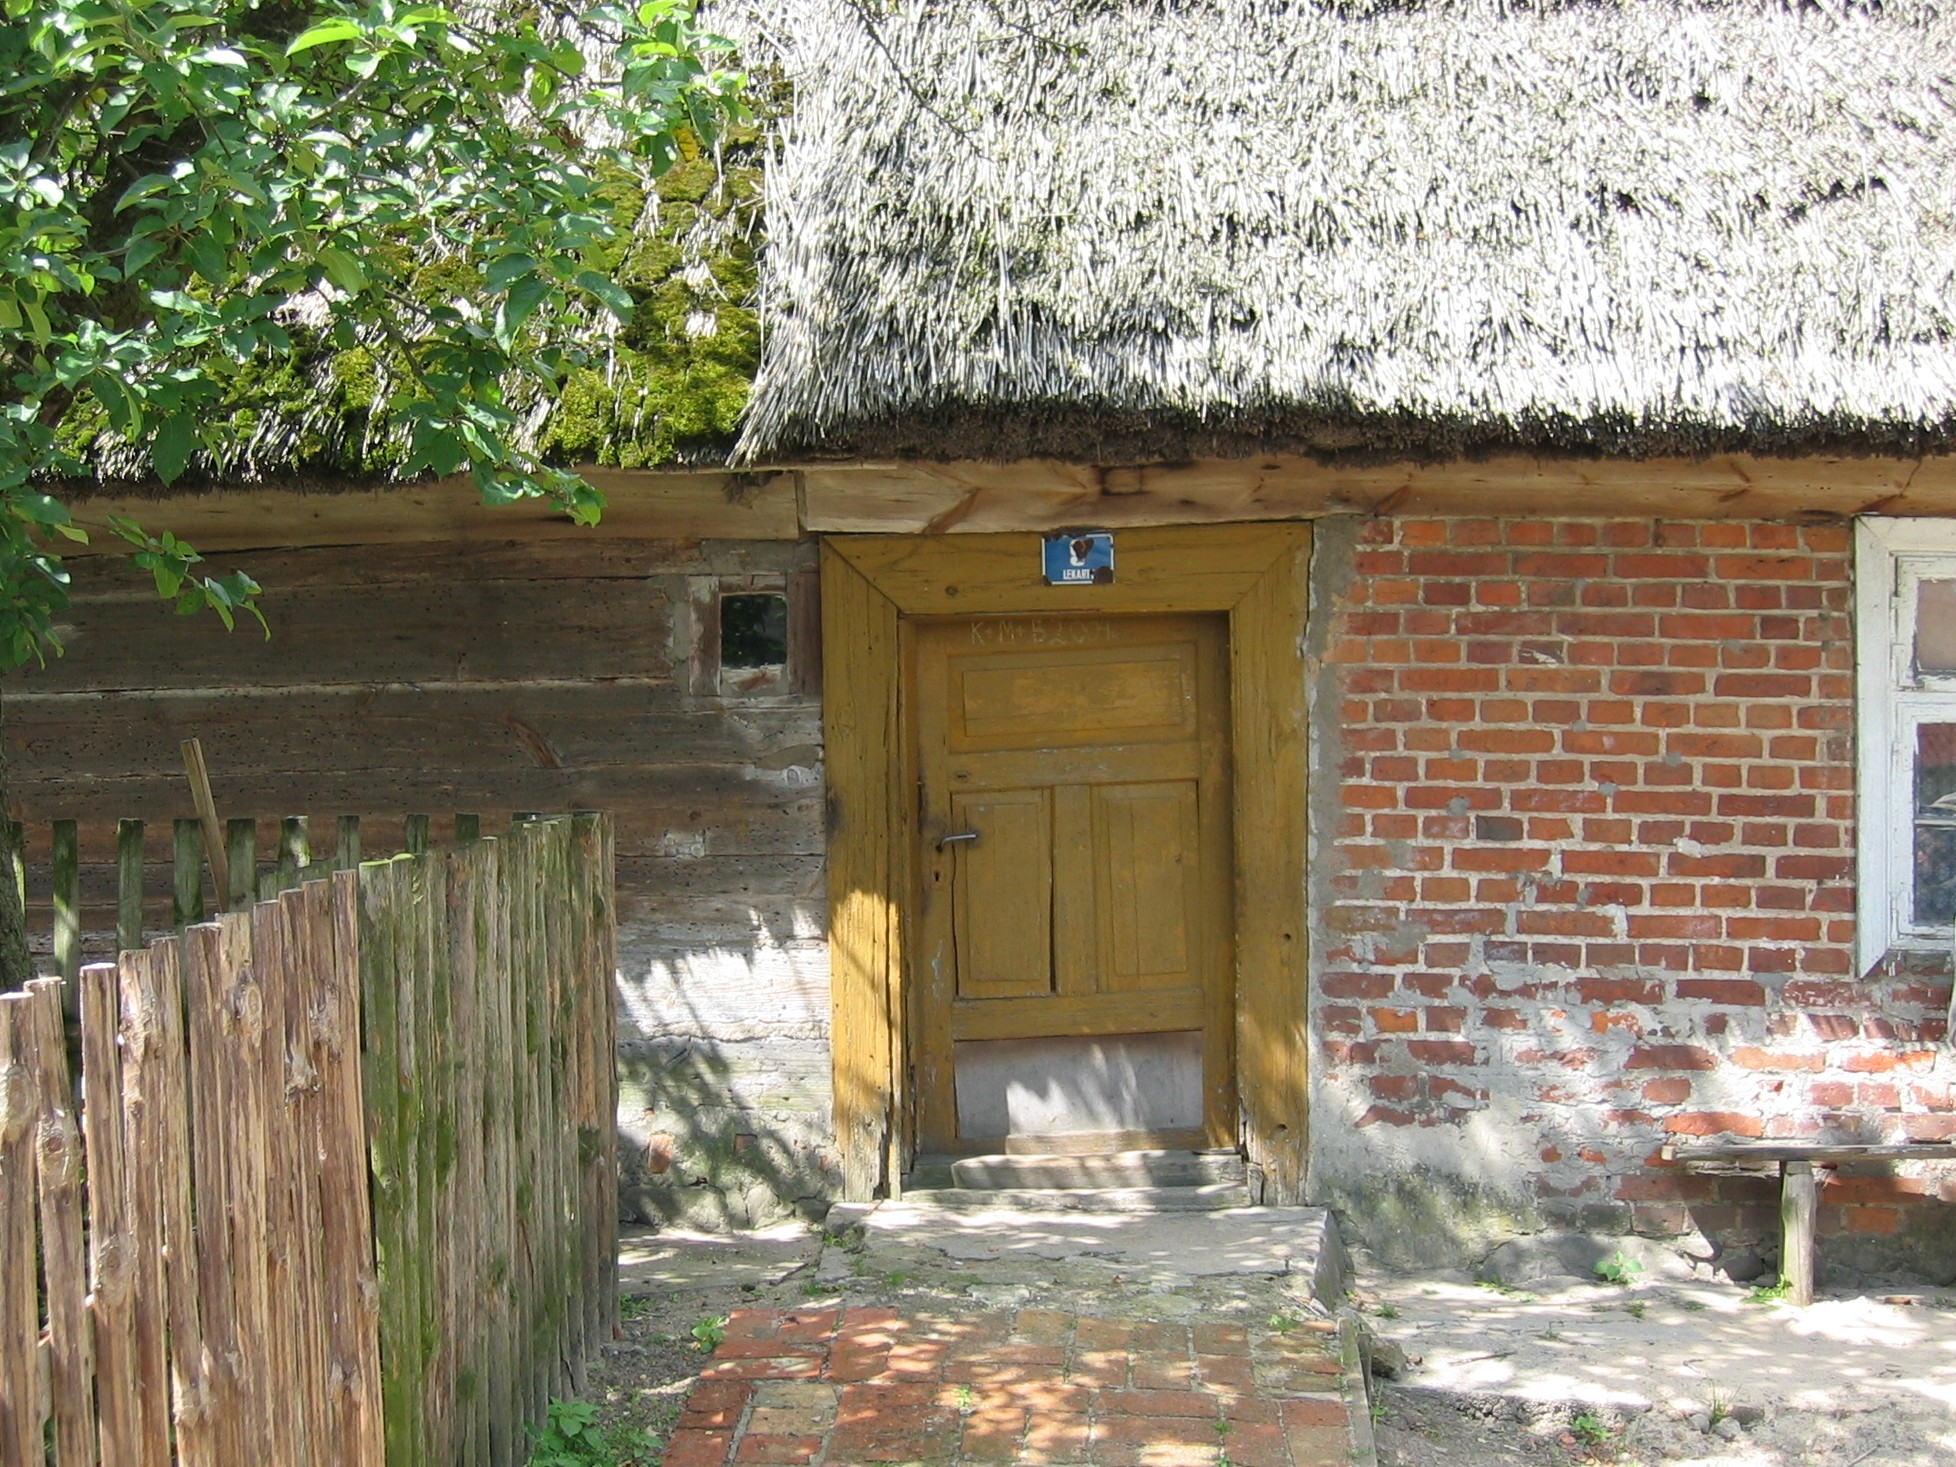 a small, rustic home with a thatched roof